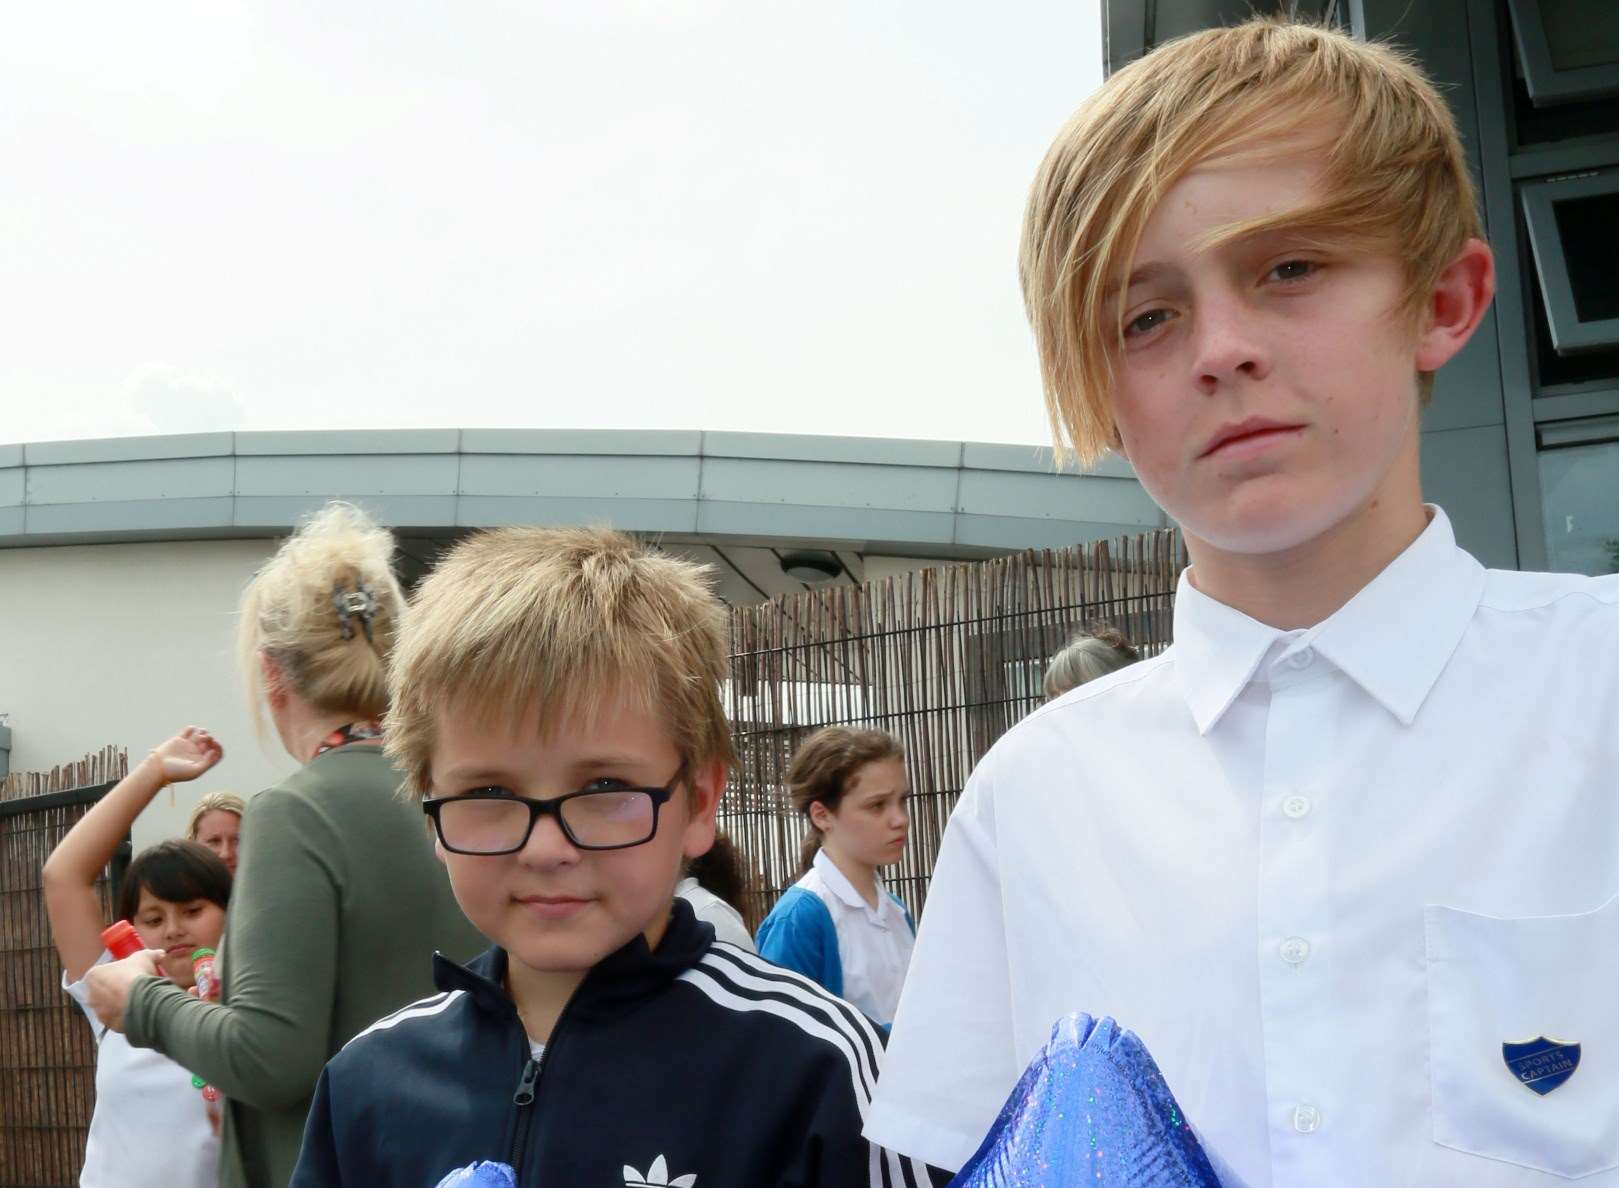 Pupils Nojus (left) and Juve (right) with their balloons.